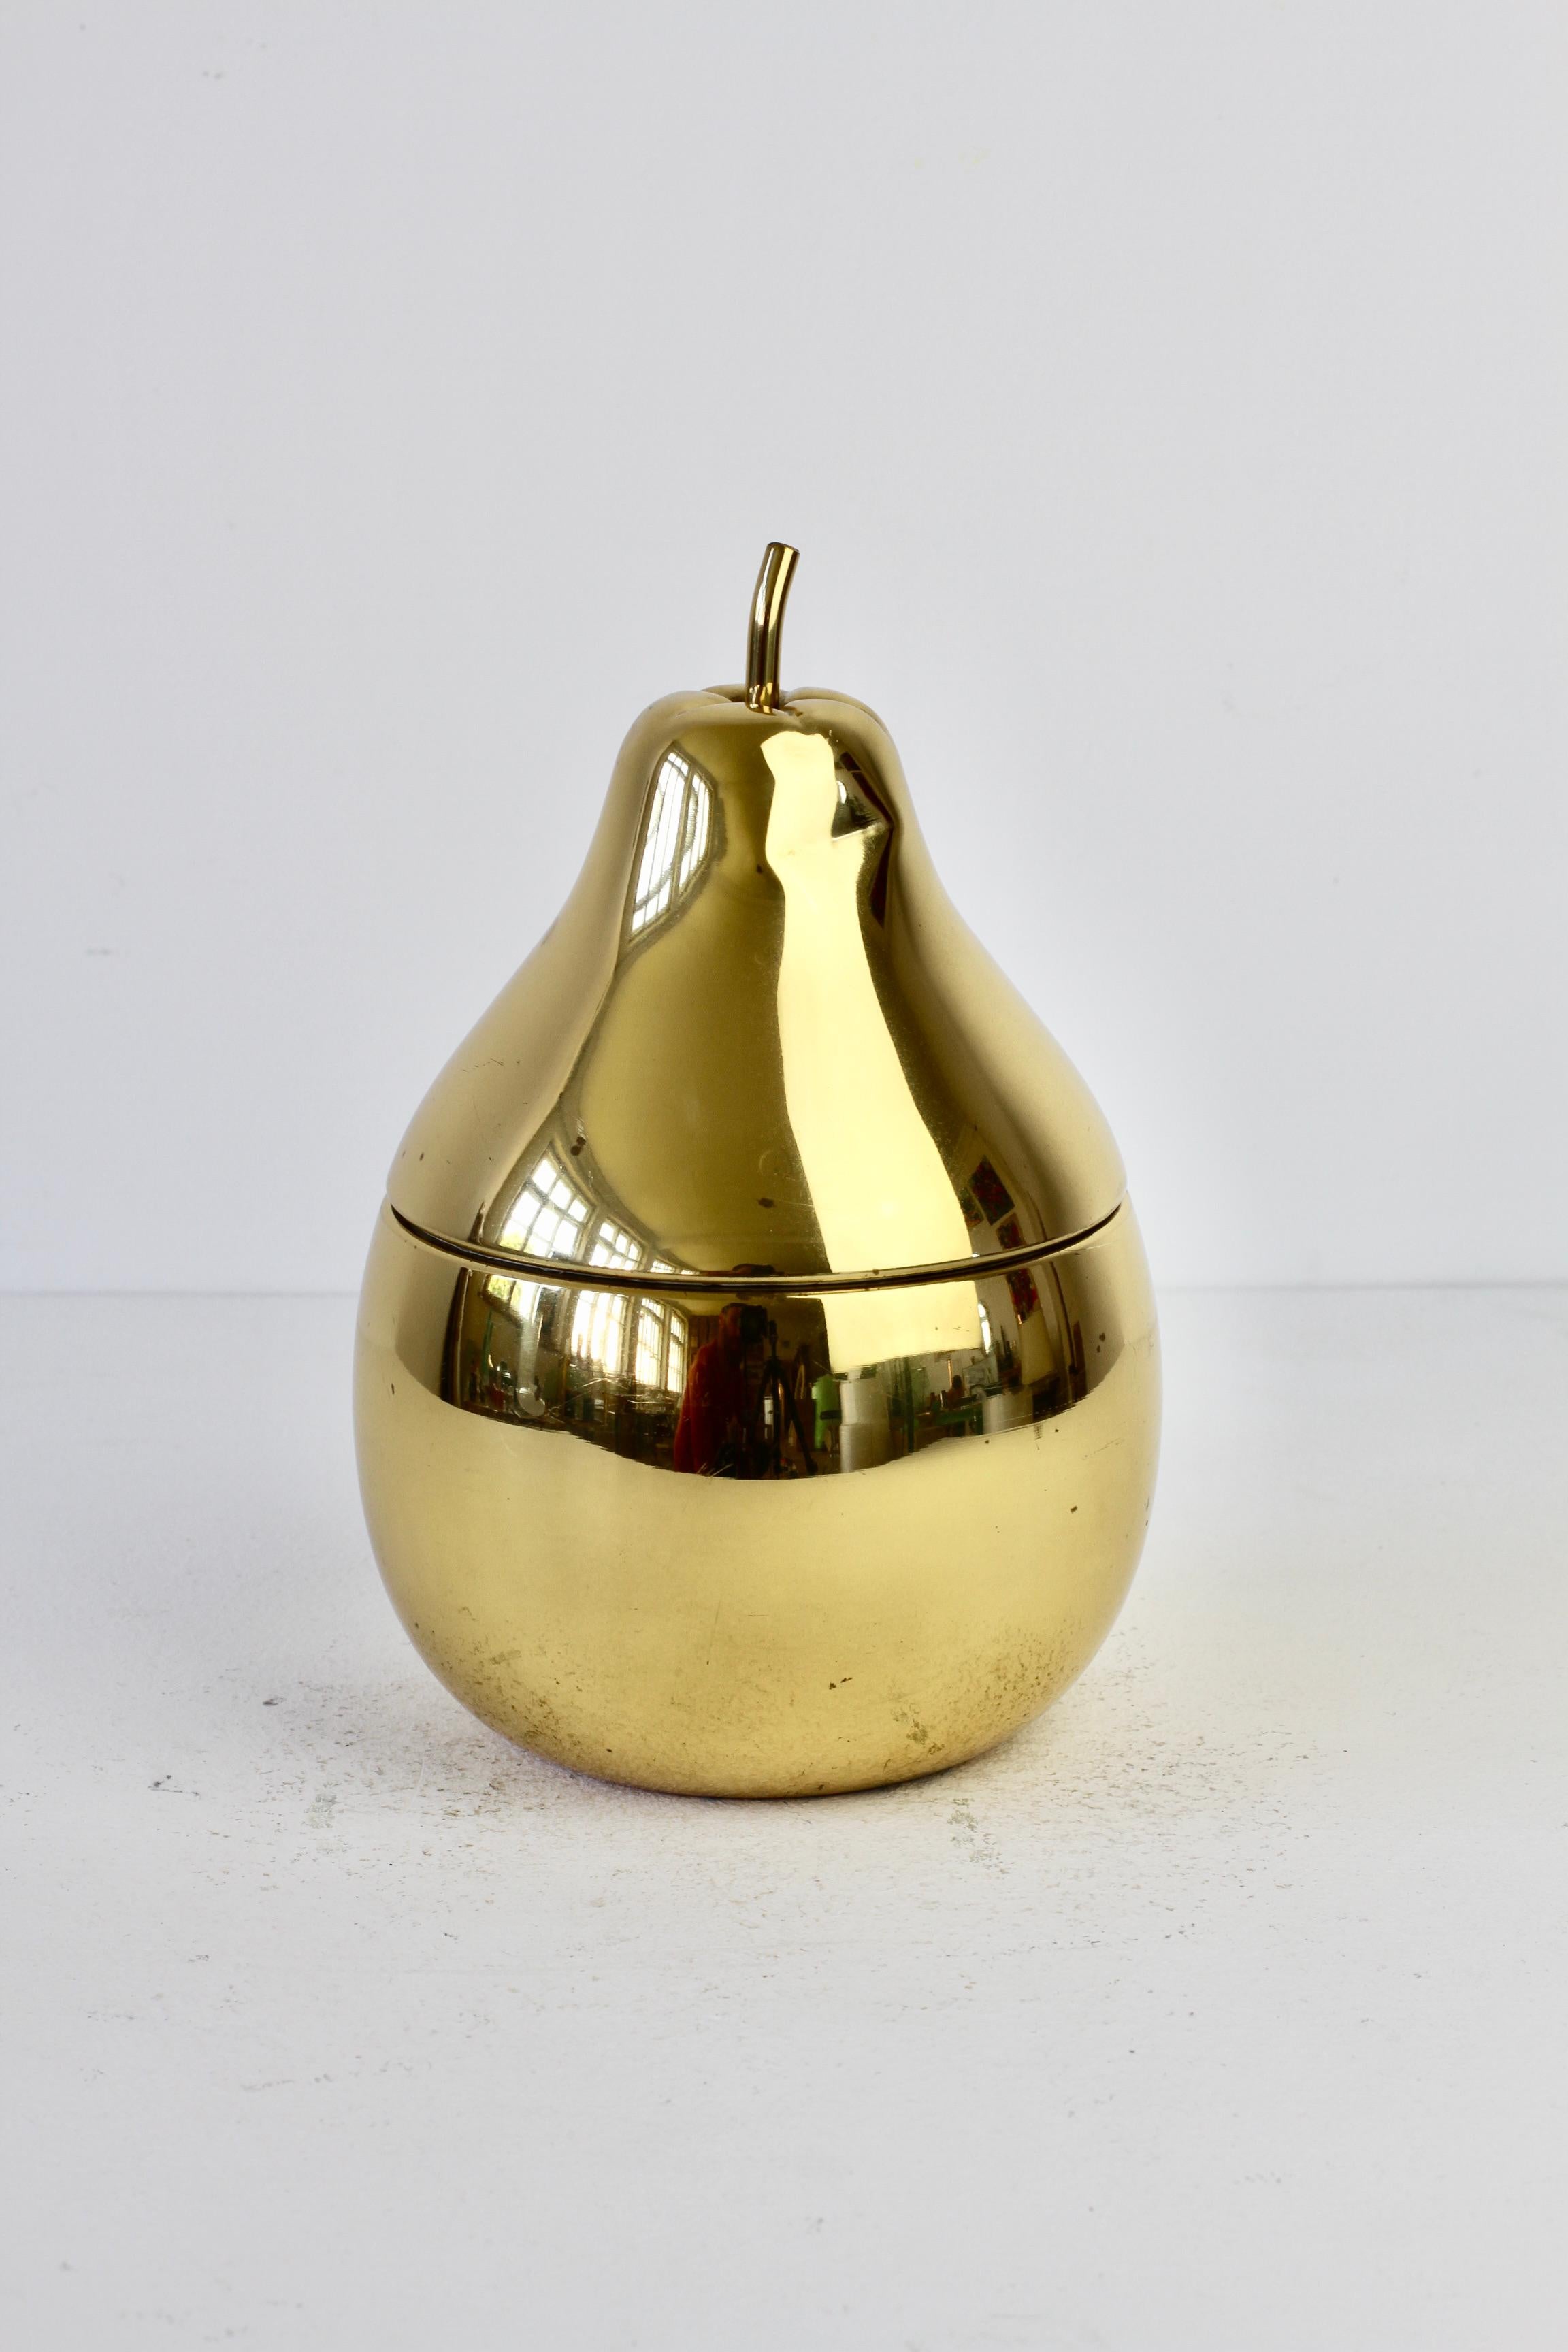 Italian Ettore Sottsass Style Vintage Pear Shaped Brass Ice Cube Bucket or Holder, 1970s For Sale